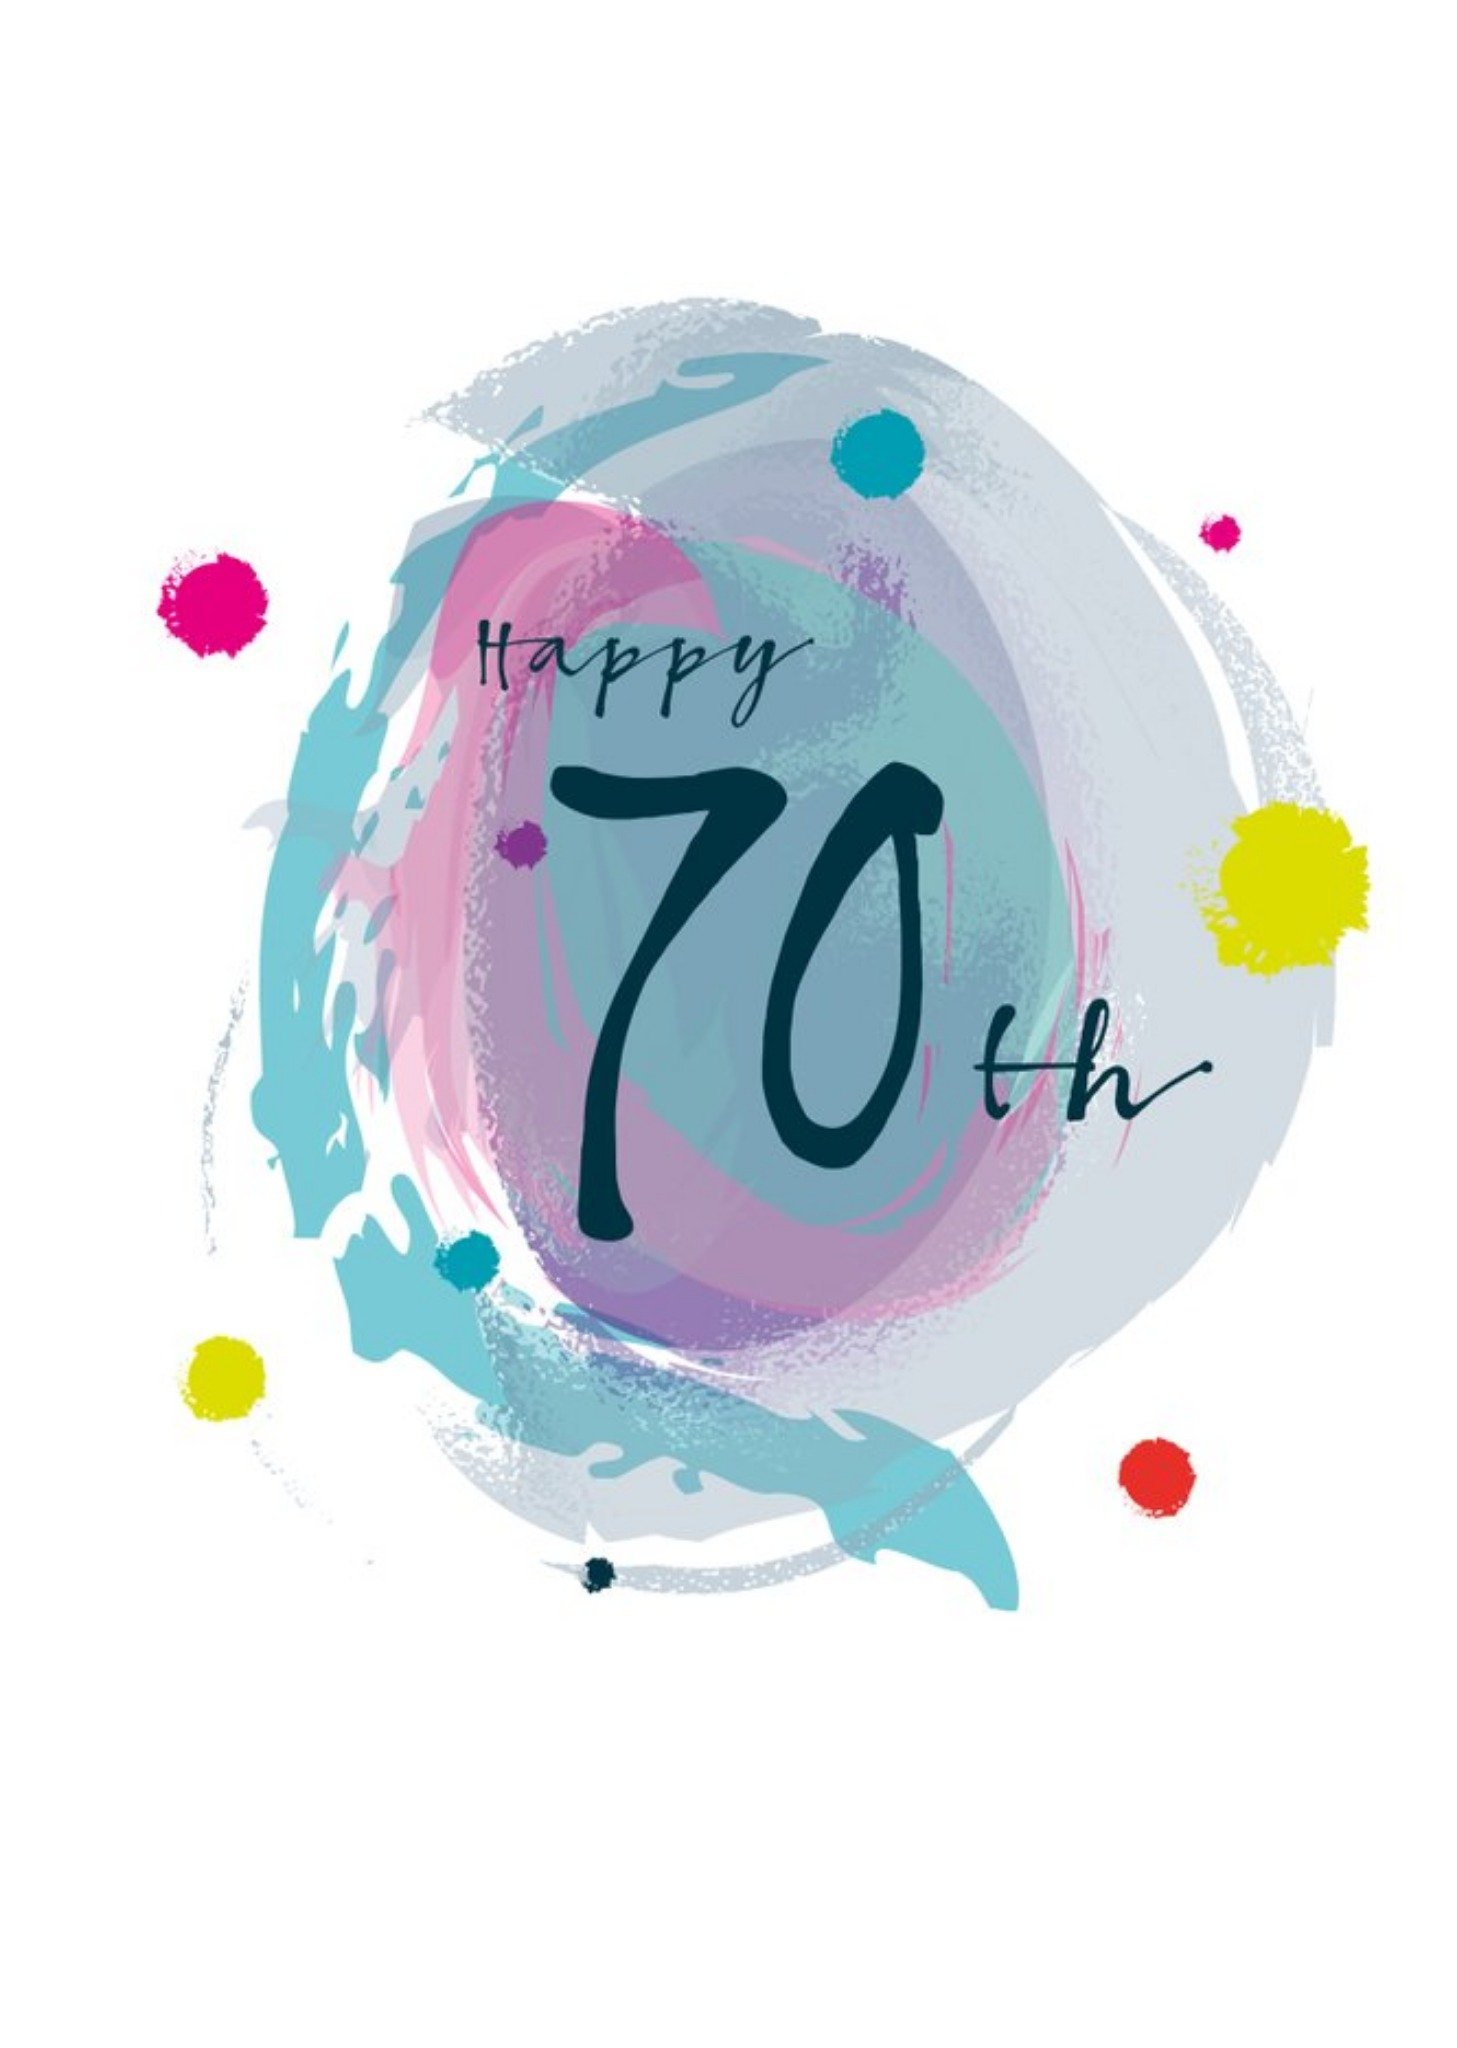 Moonpig Modern Watercolour Paint Effect Happy 70th Birthday Card, Large